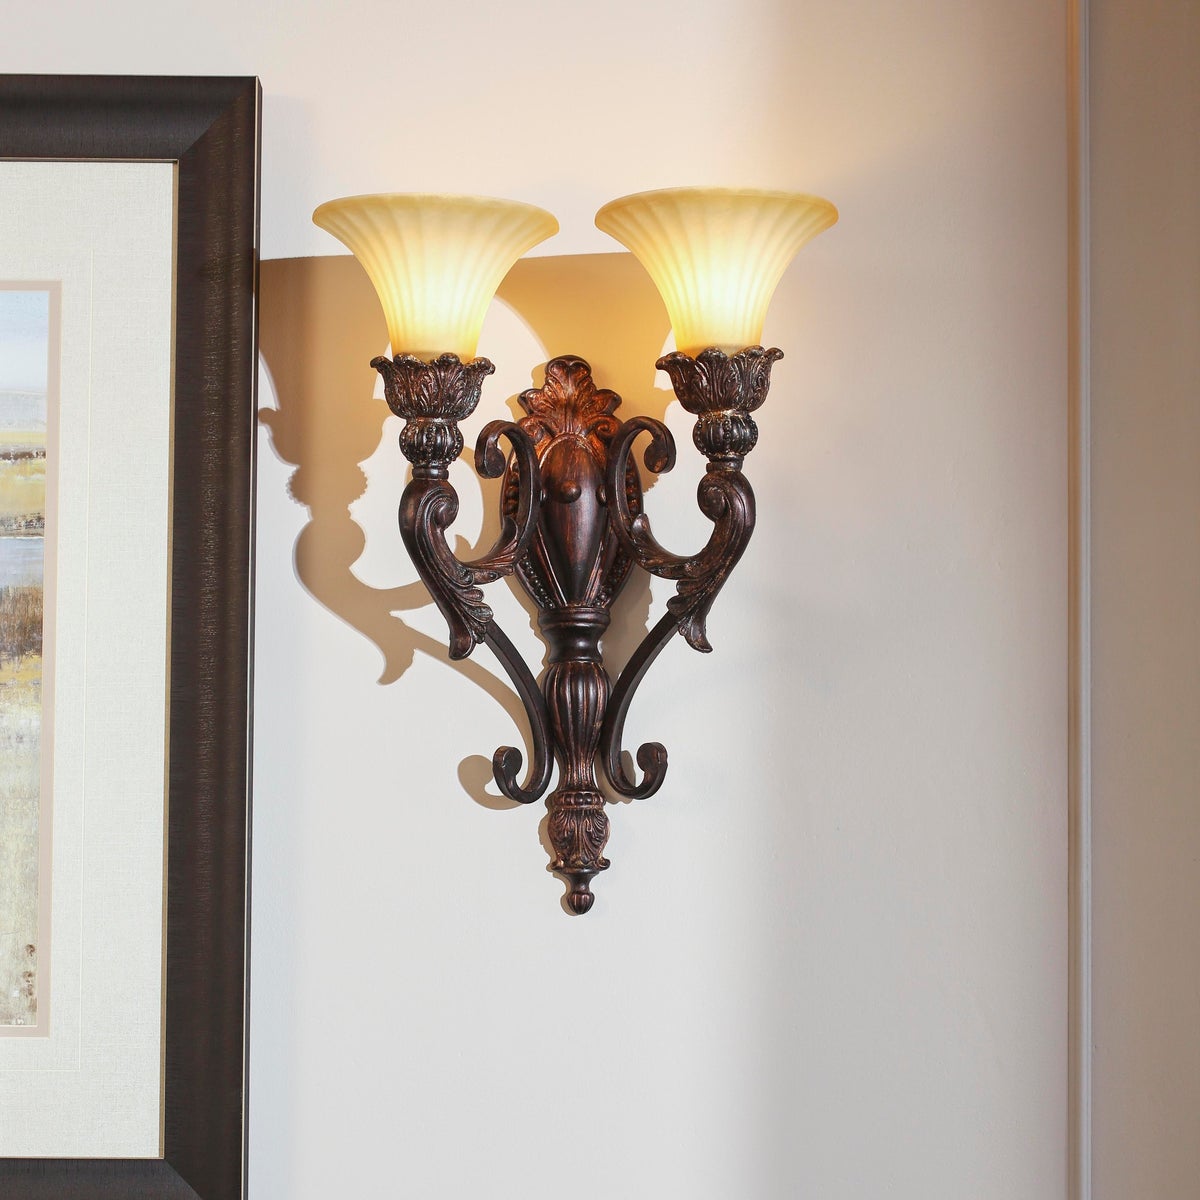 Traditional Wall Sconce with Corsican Gold Finish, featuring a cast structure and ornate wood and bronze detailing. Two shades provide elegant lighting.